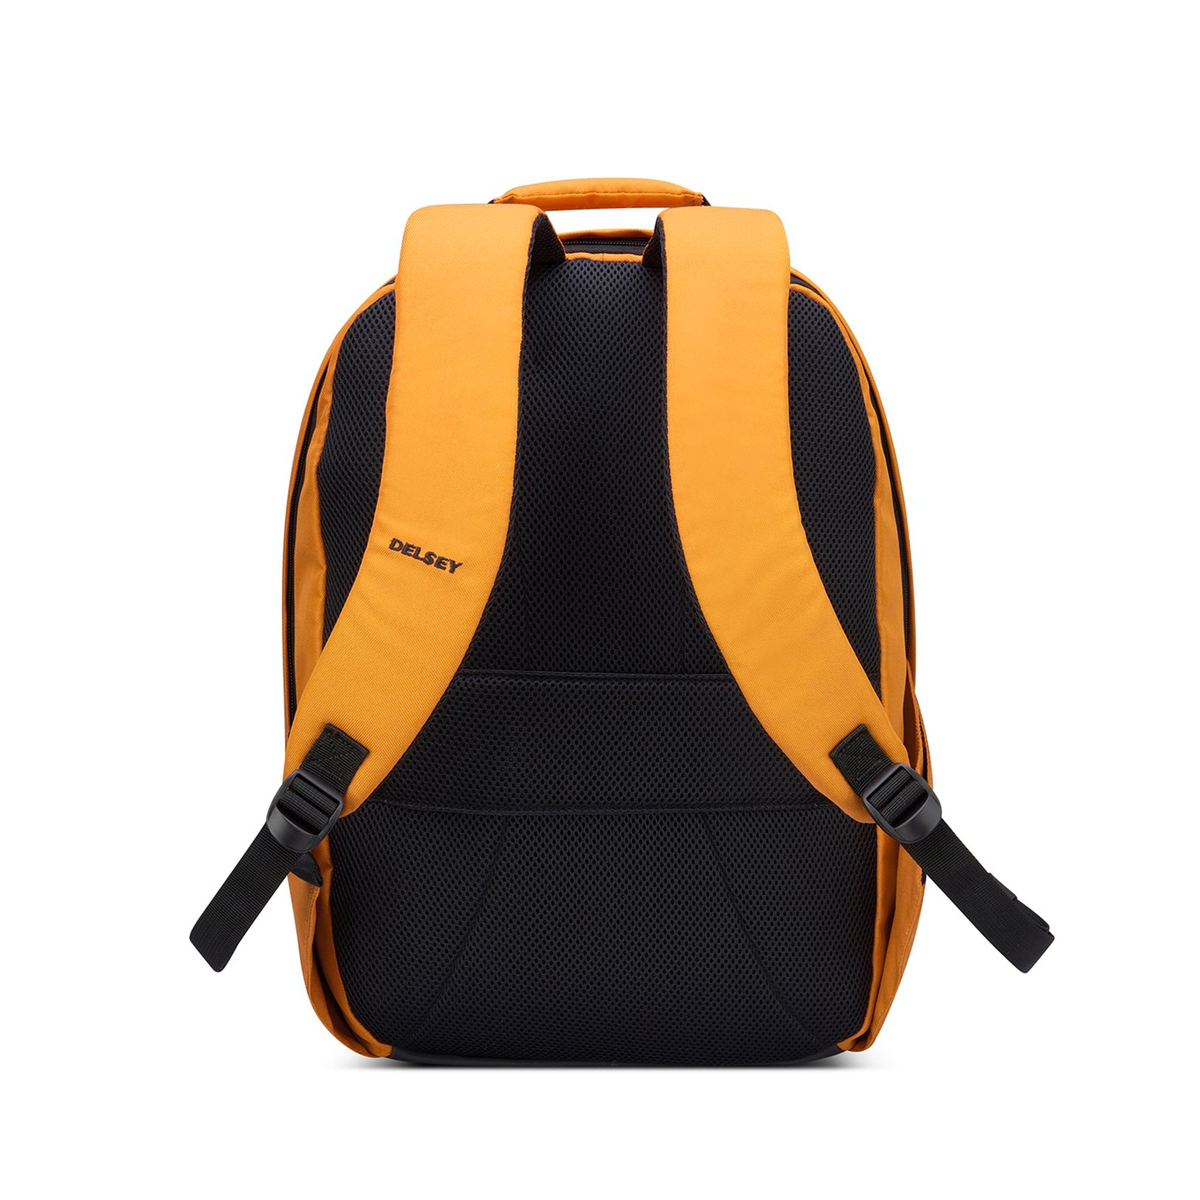 Delsey Securban Laptop Backpack 15.6" 3334600 Yellow